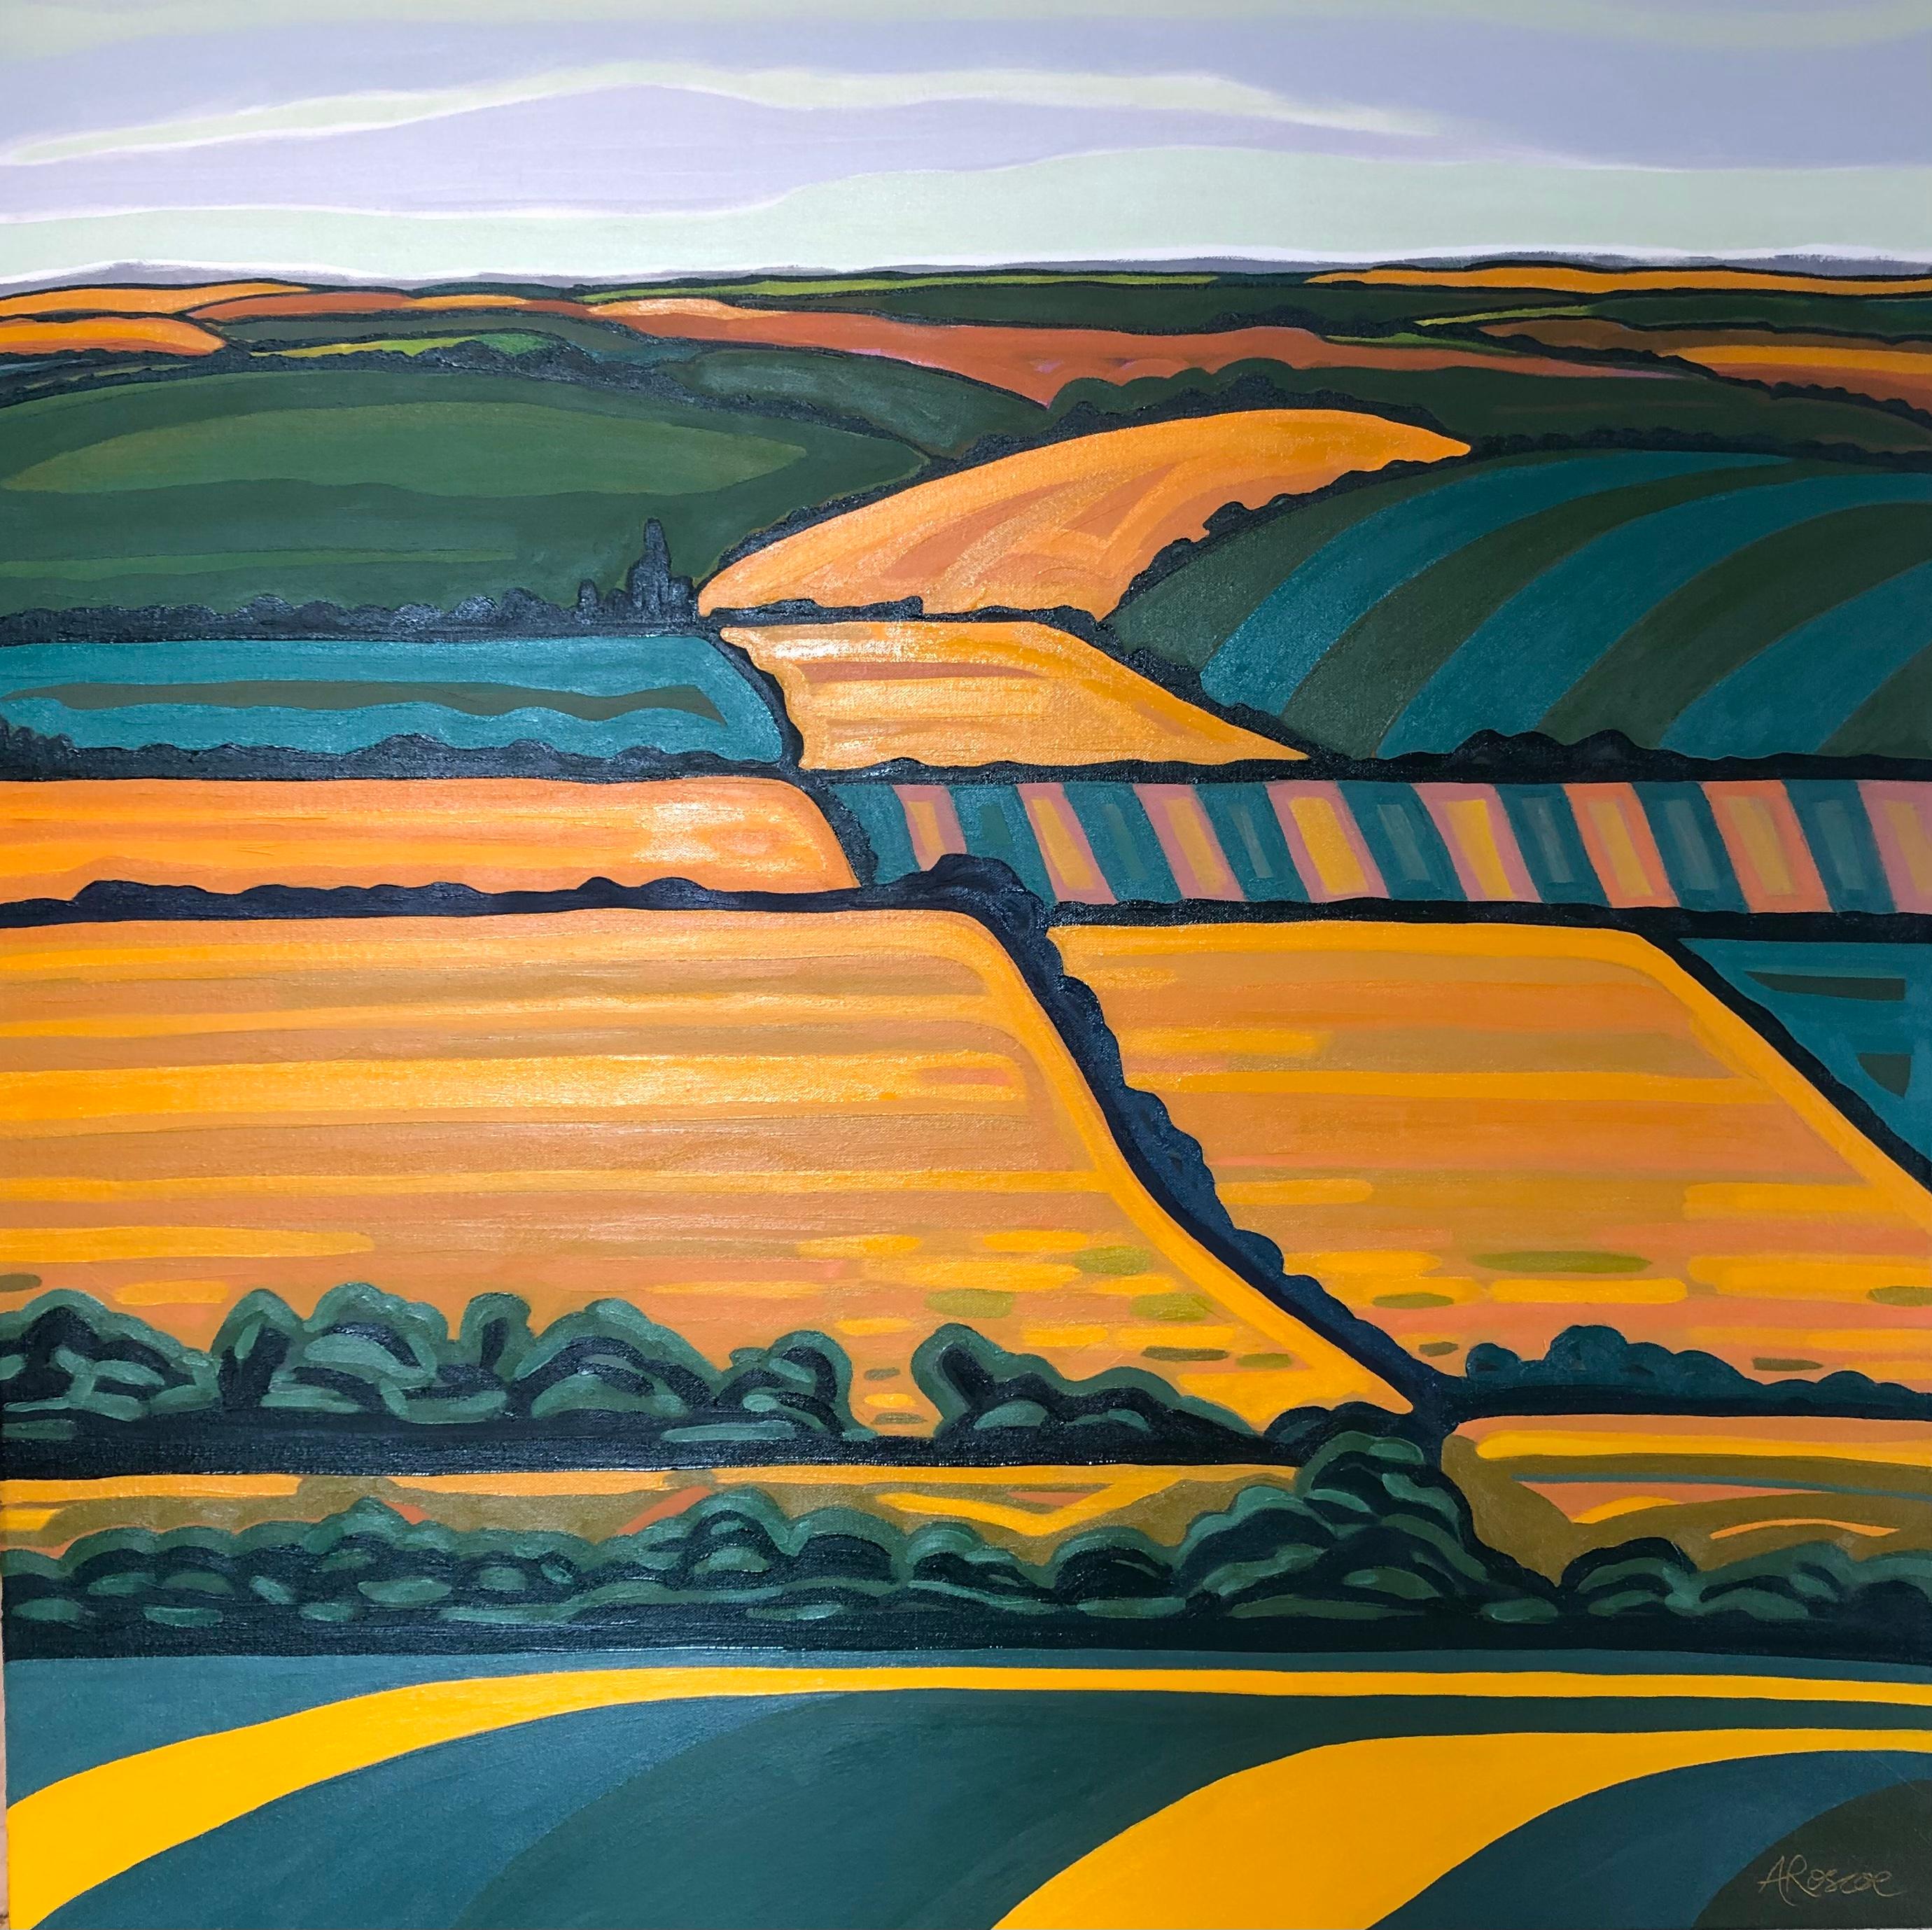 Hill View no. 2, Contemporary landscape painting, meadows, hills, countryside 